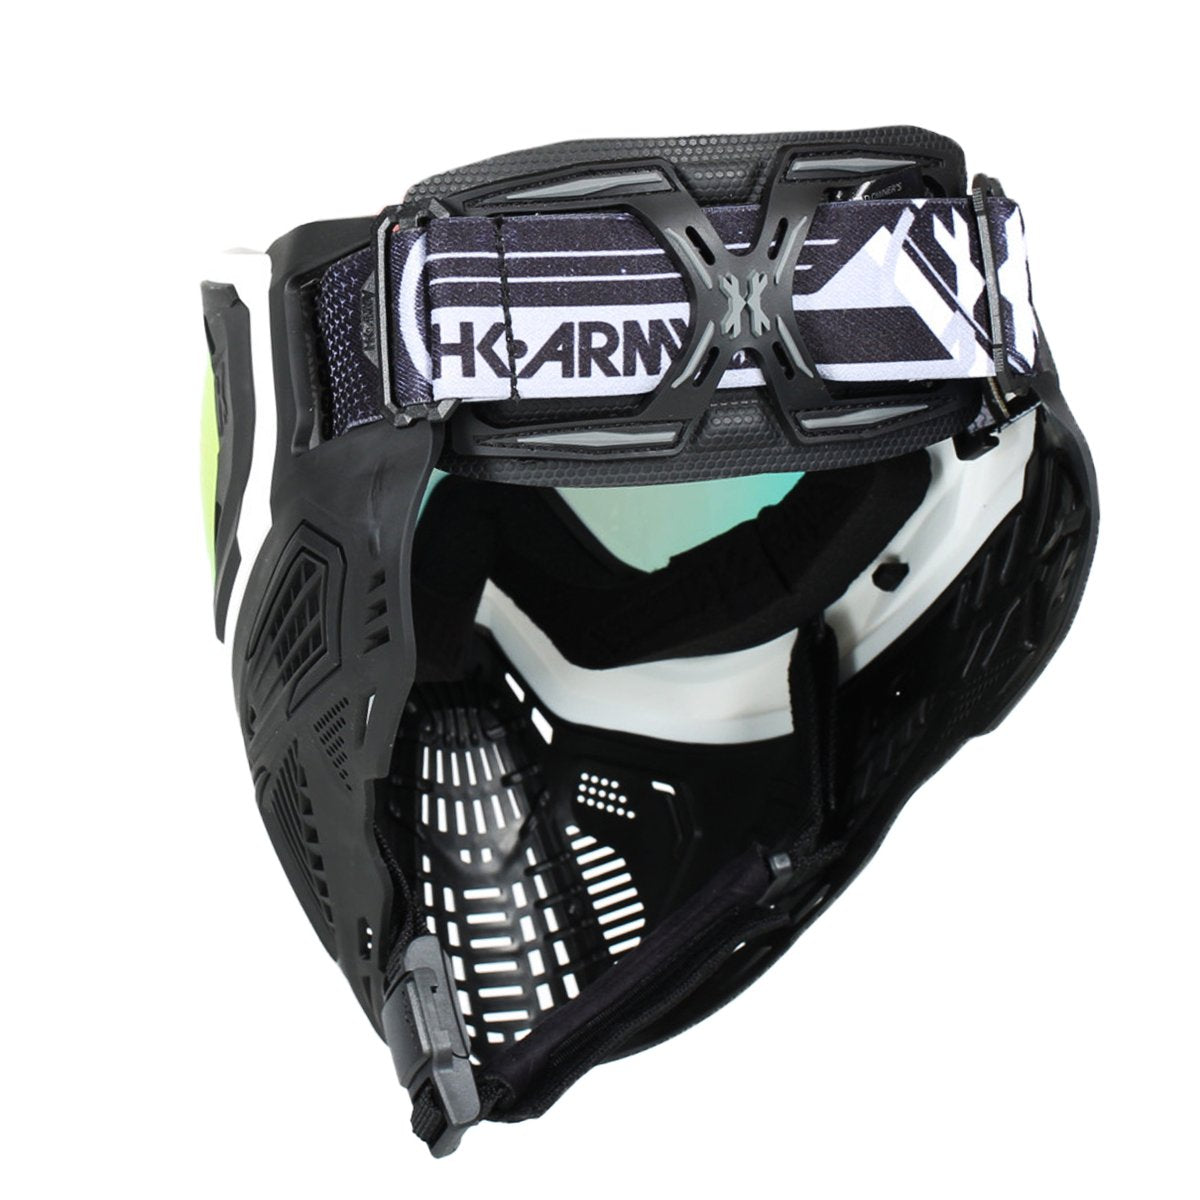 SLR Goggle - Trooper (White/Black/Black) Scorch Lens - Eminent Paintball And Airsoft